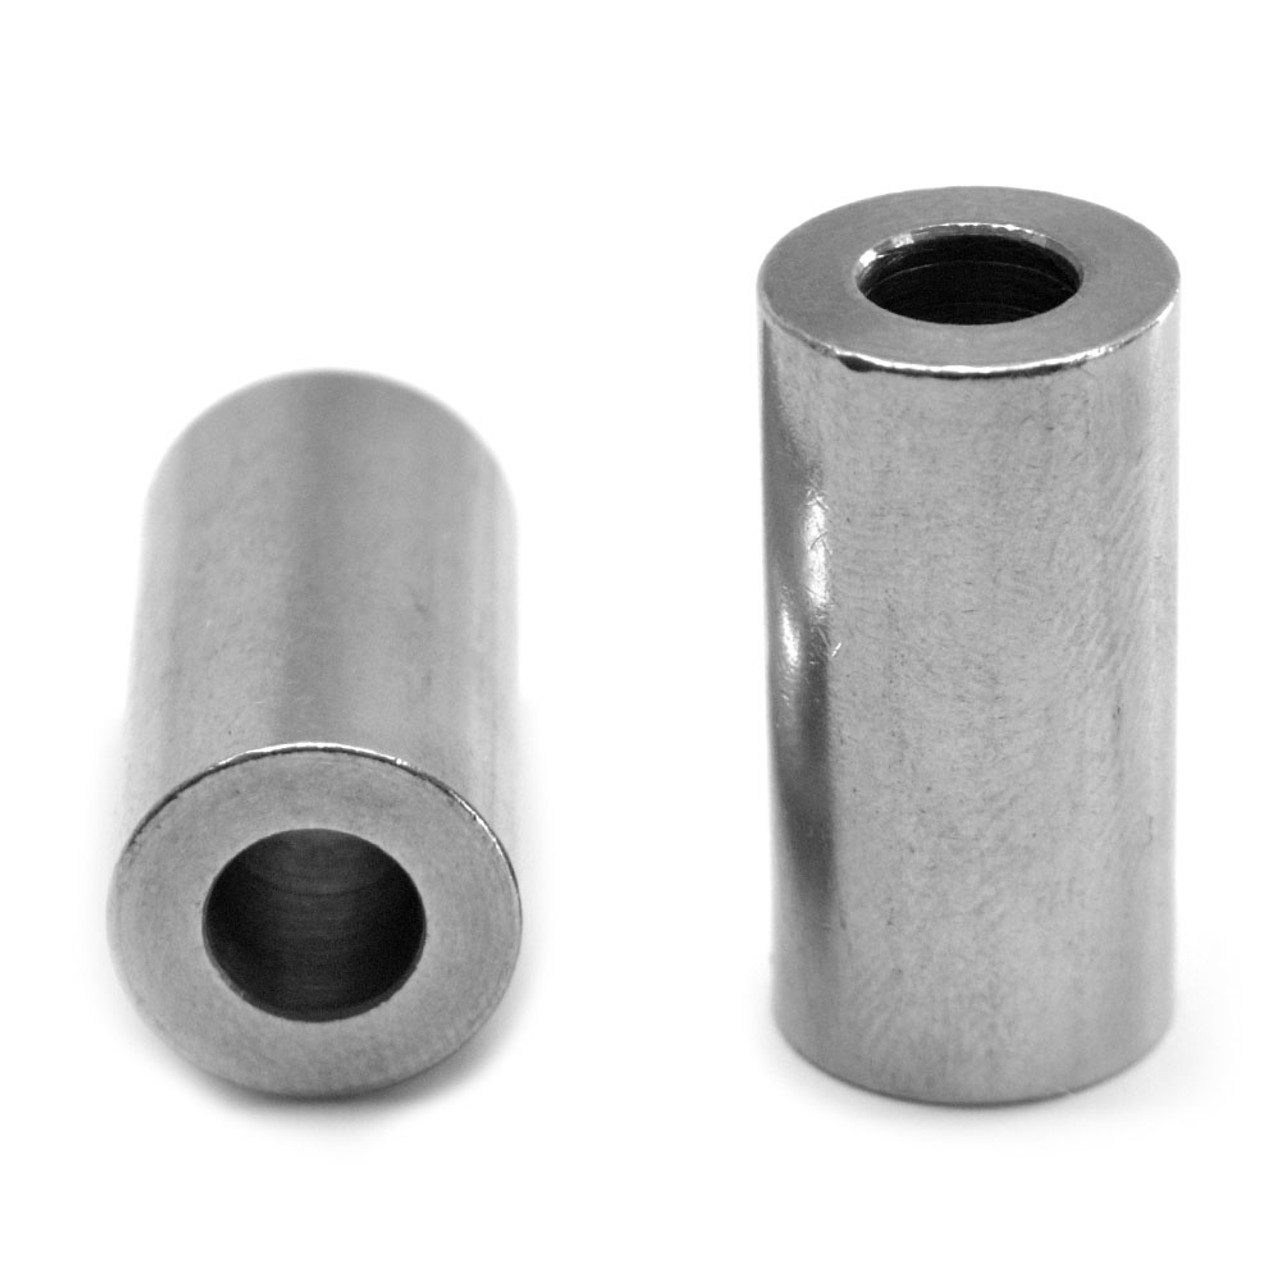 #6 x 1/2" x 5/16" OD Round Spacer Stainless Steel 18-8